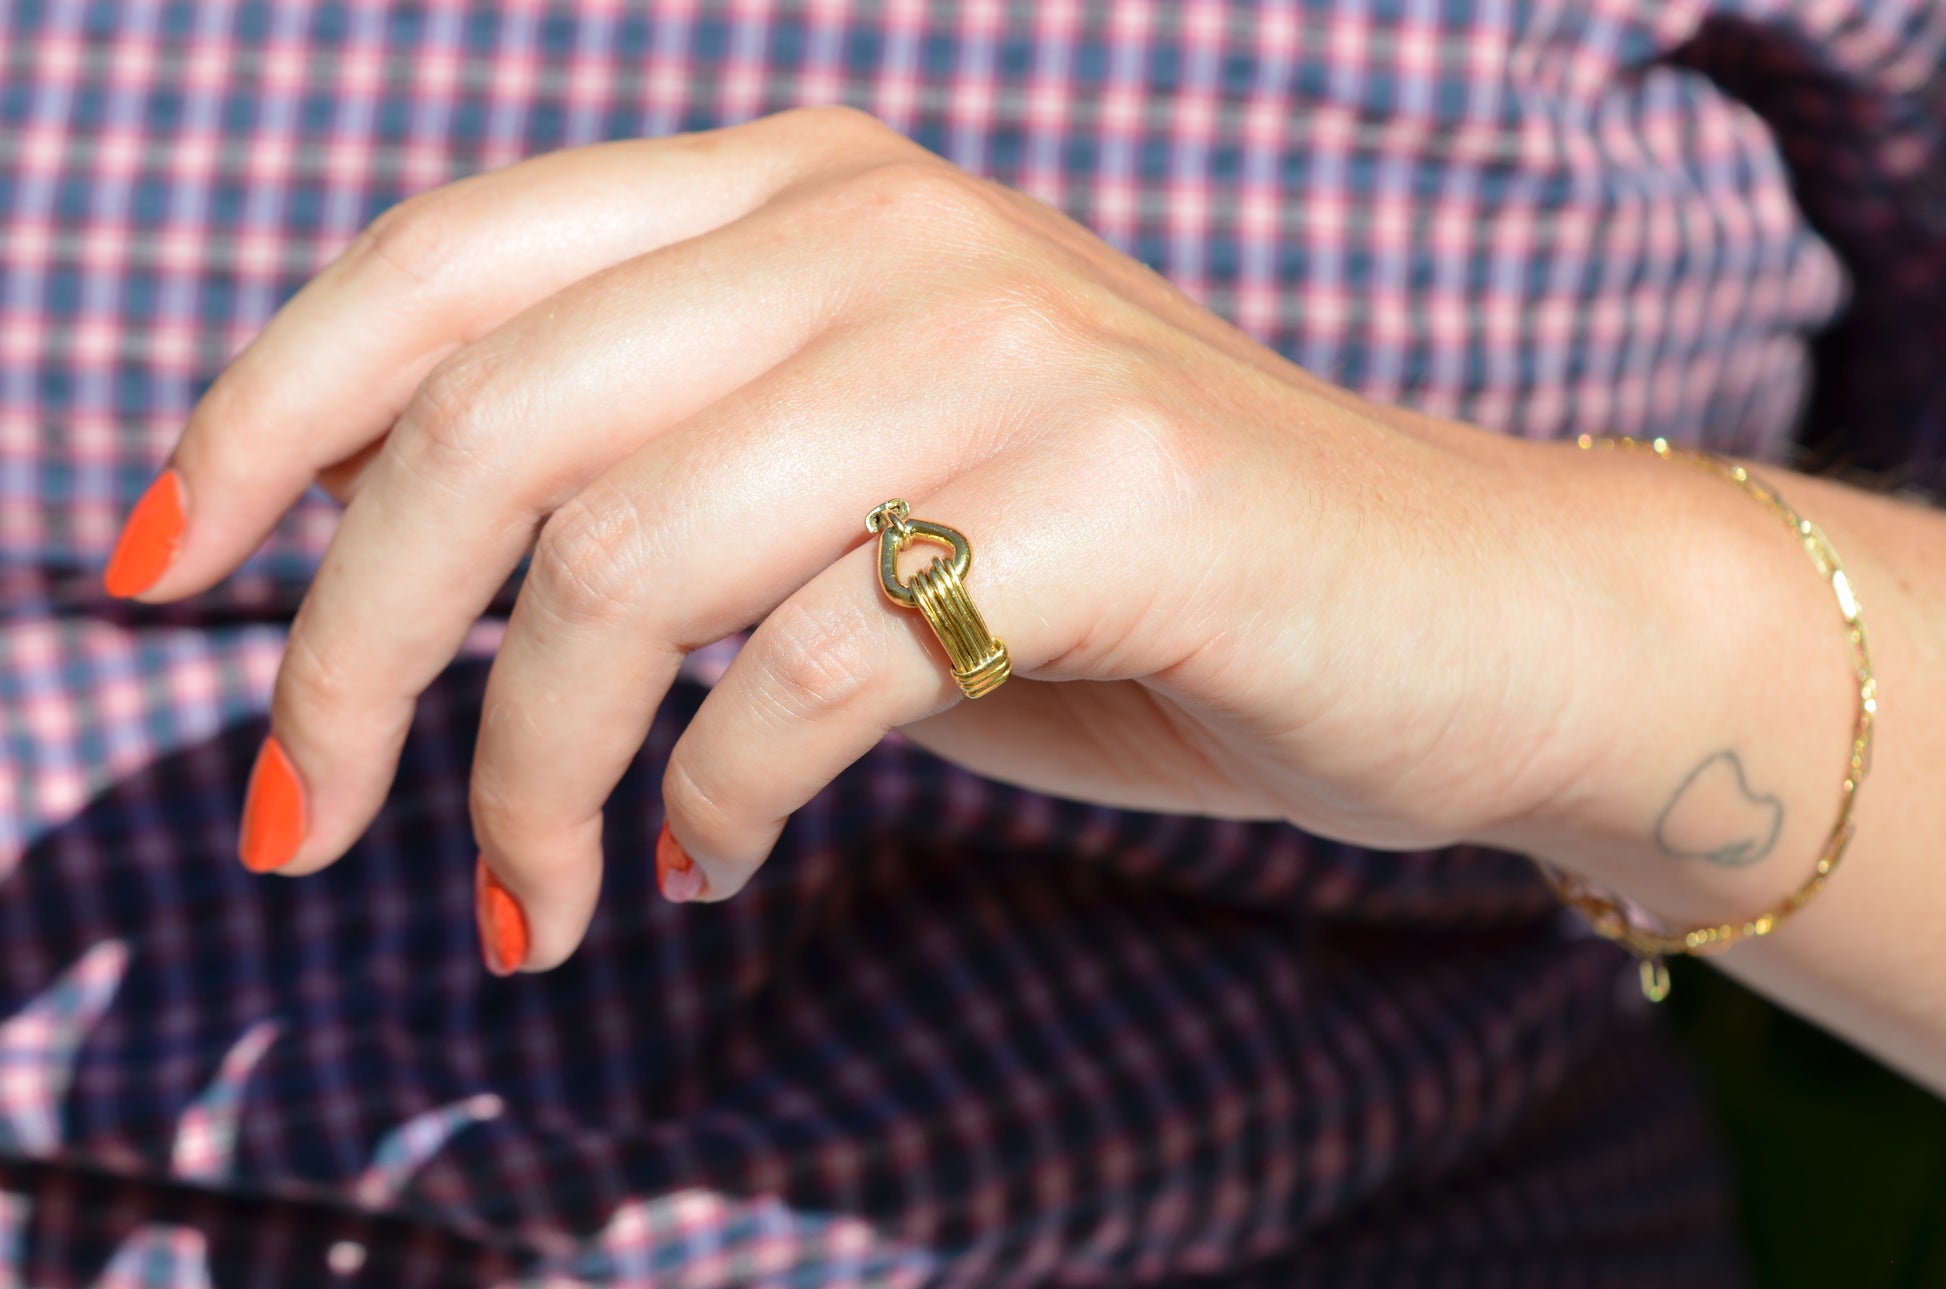 A medium-close view of the ring on a Caucasian model's left pinky finger. Her nail polish is an orangey-red, and in the background her blue and red gingham blouse is visible.